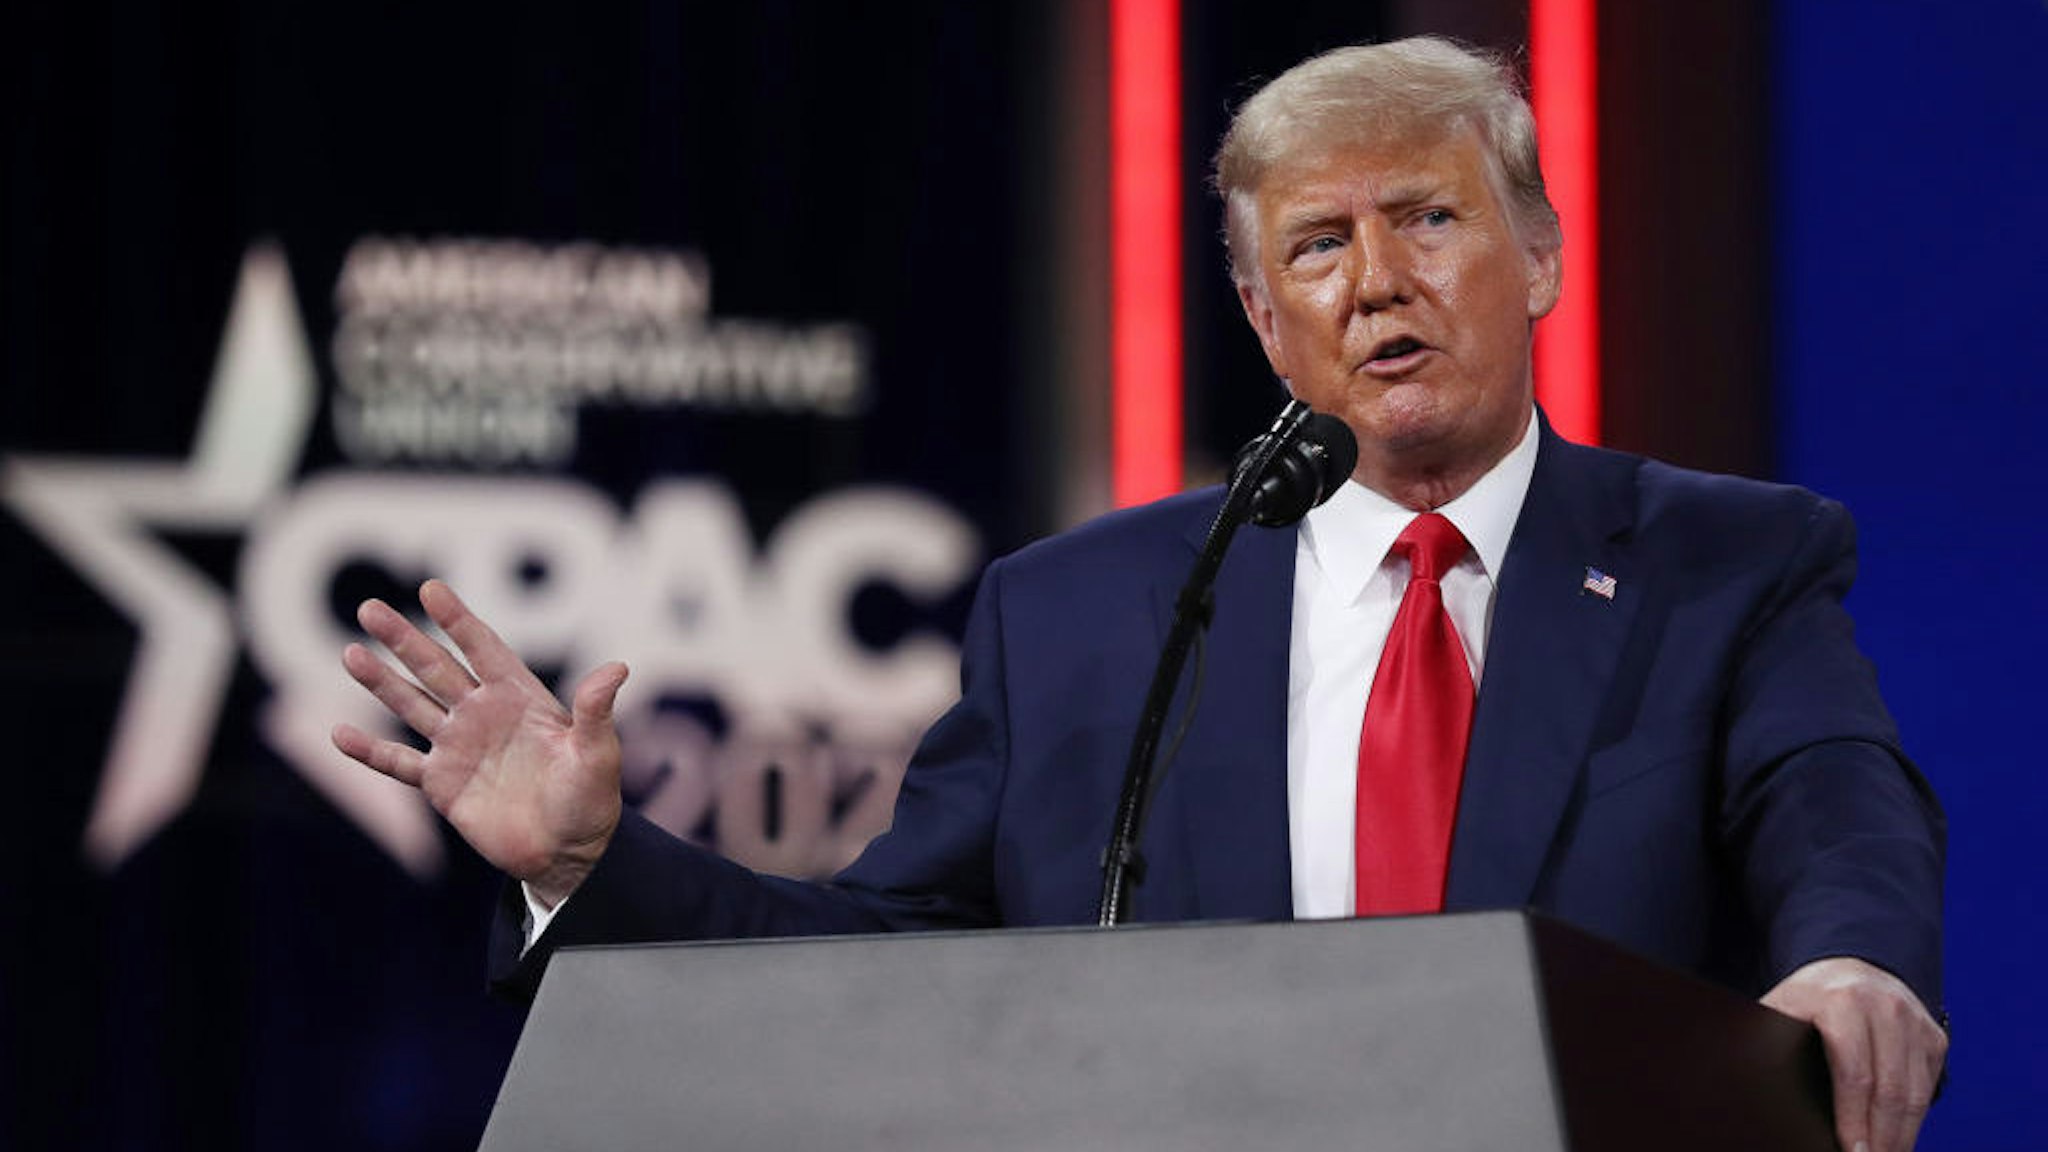 ORLANDO, FLORIDA - FEBRUARY 28: Former U.S. President Donald Trump addresses the Conservative Political Action Conference (CPAC) held in the Hyatt Regency on February 28, 2021 in Orlando, Florida. Begun in 1974, CPAC brings together conservative organizations, activists, and world leaders to discuss issues important to them. (Photo by Joe Raedle/Getty Images)